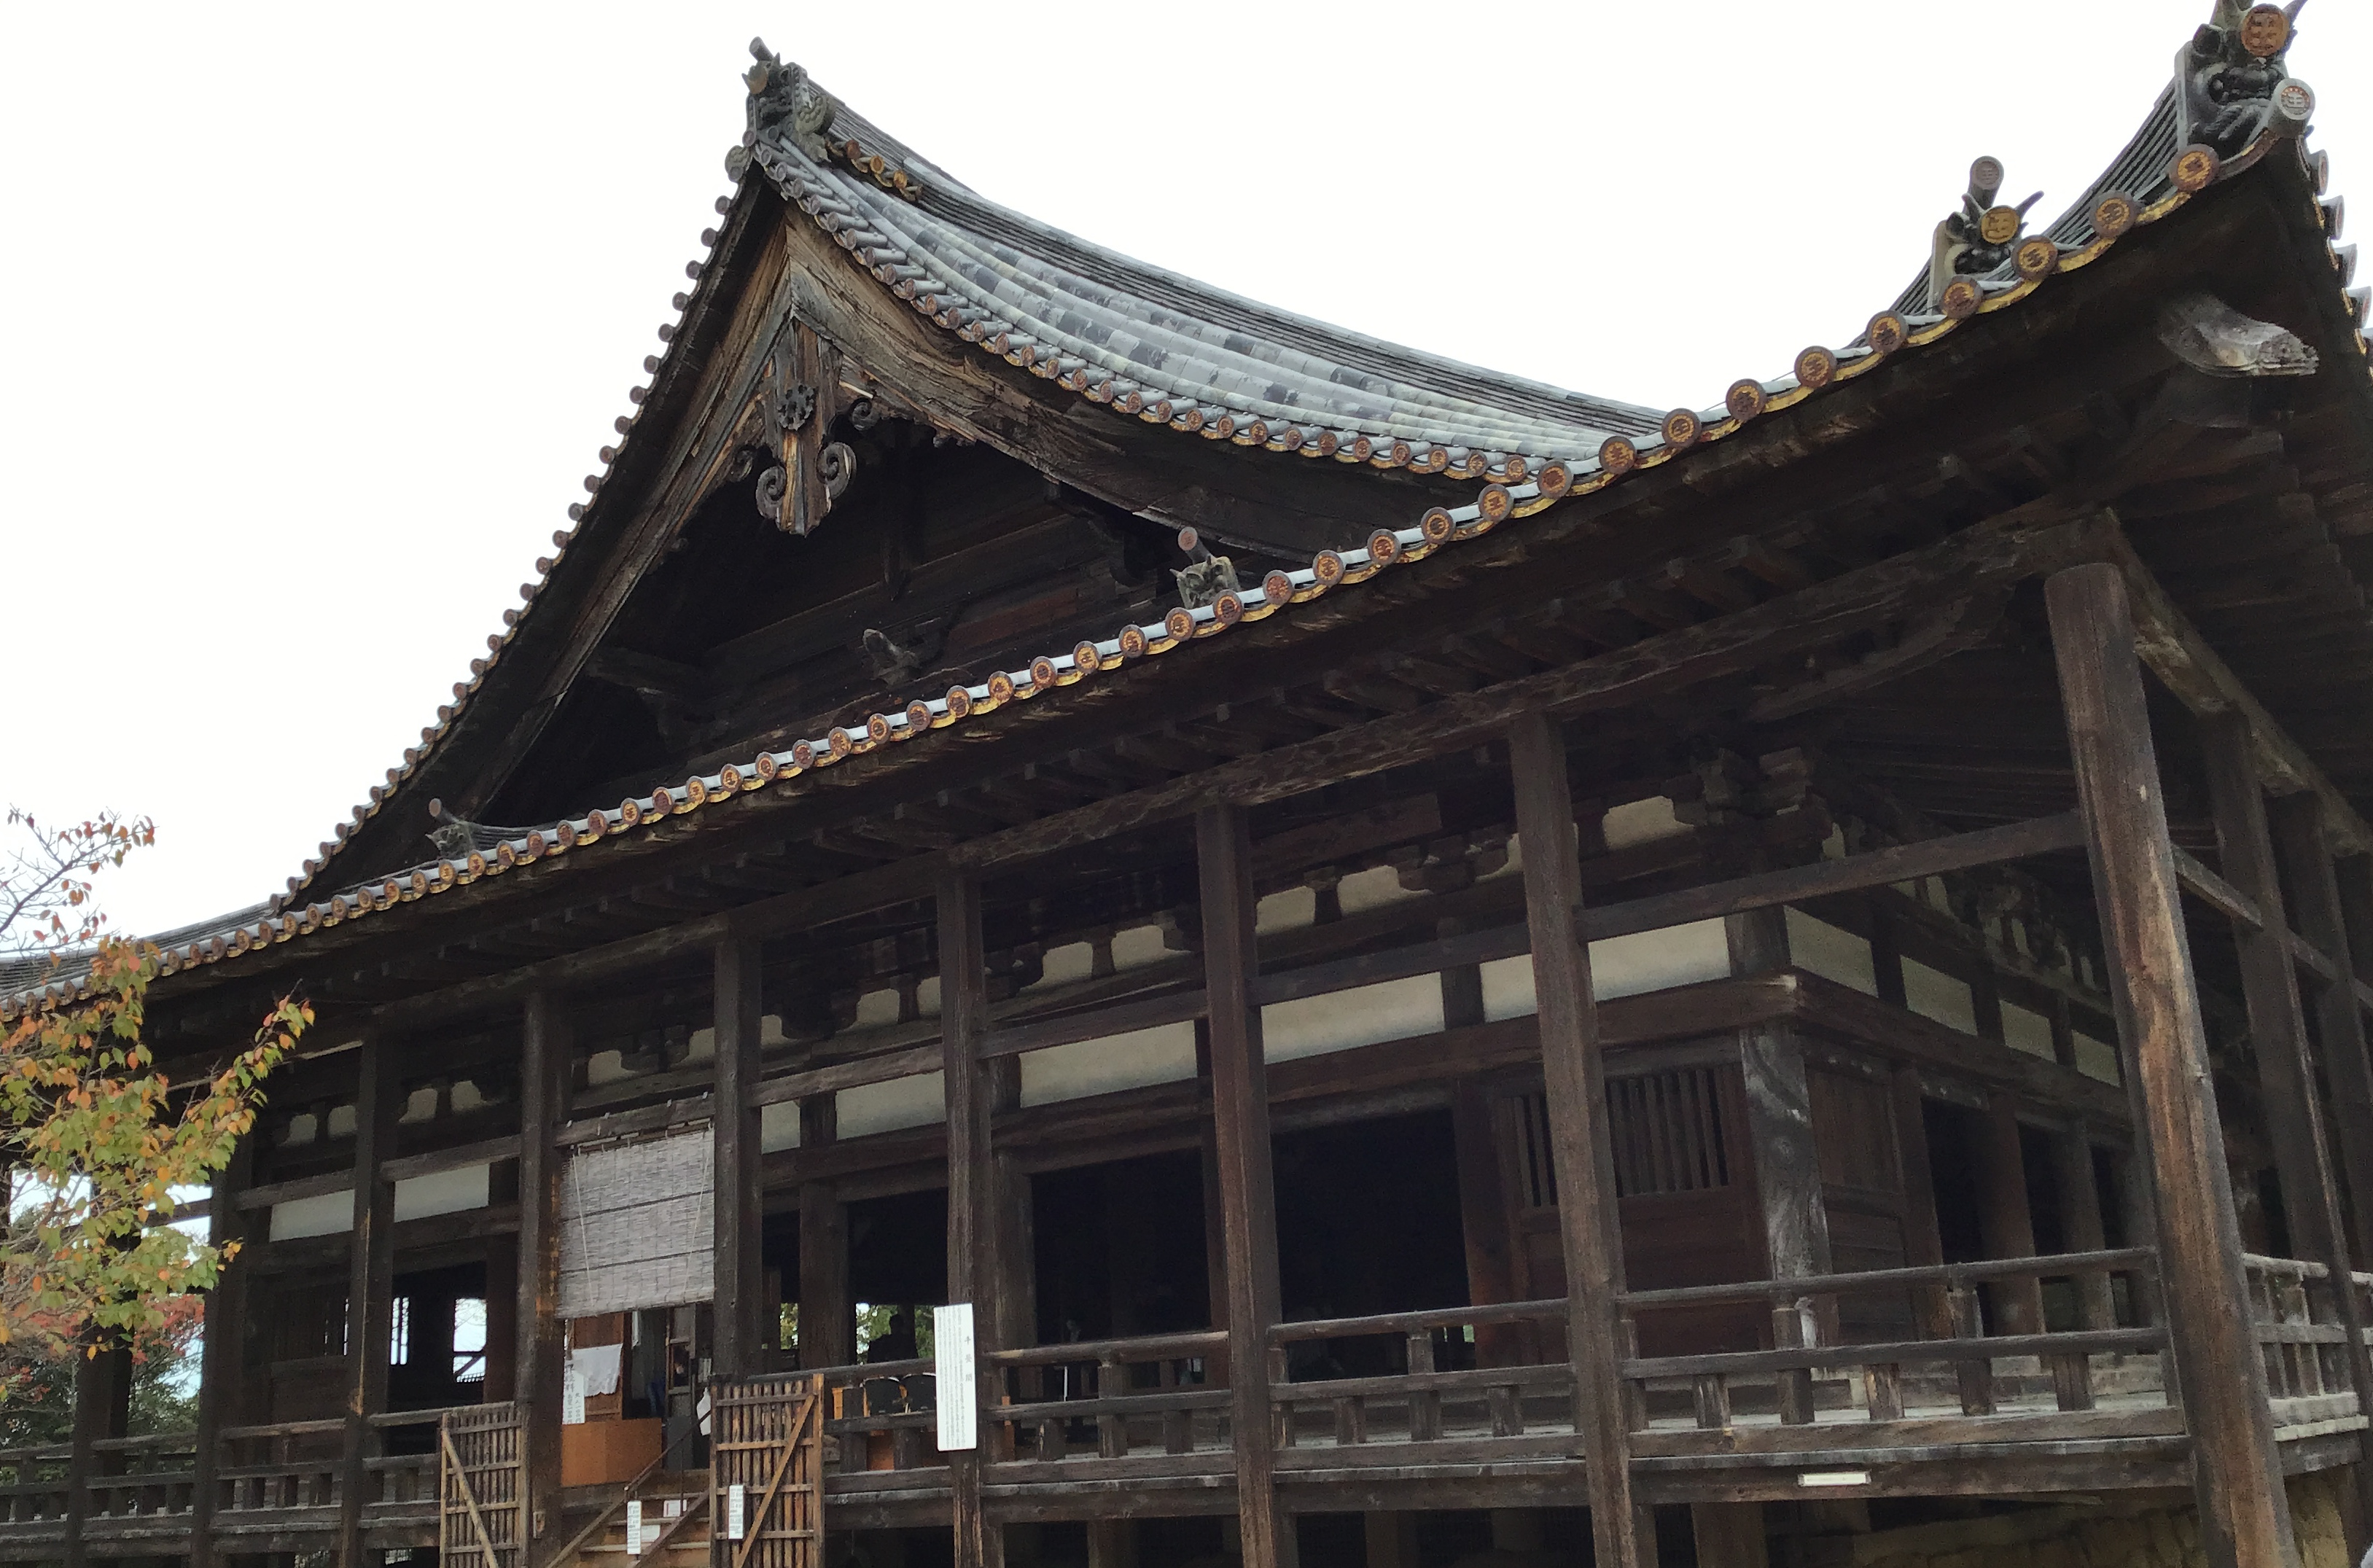 A wooden temple